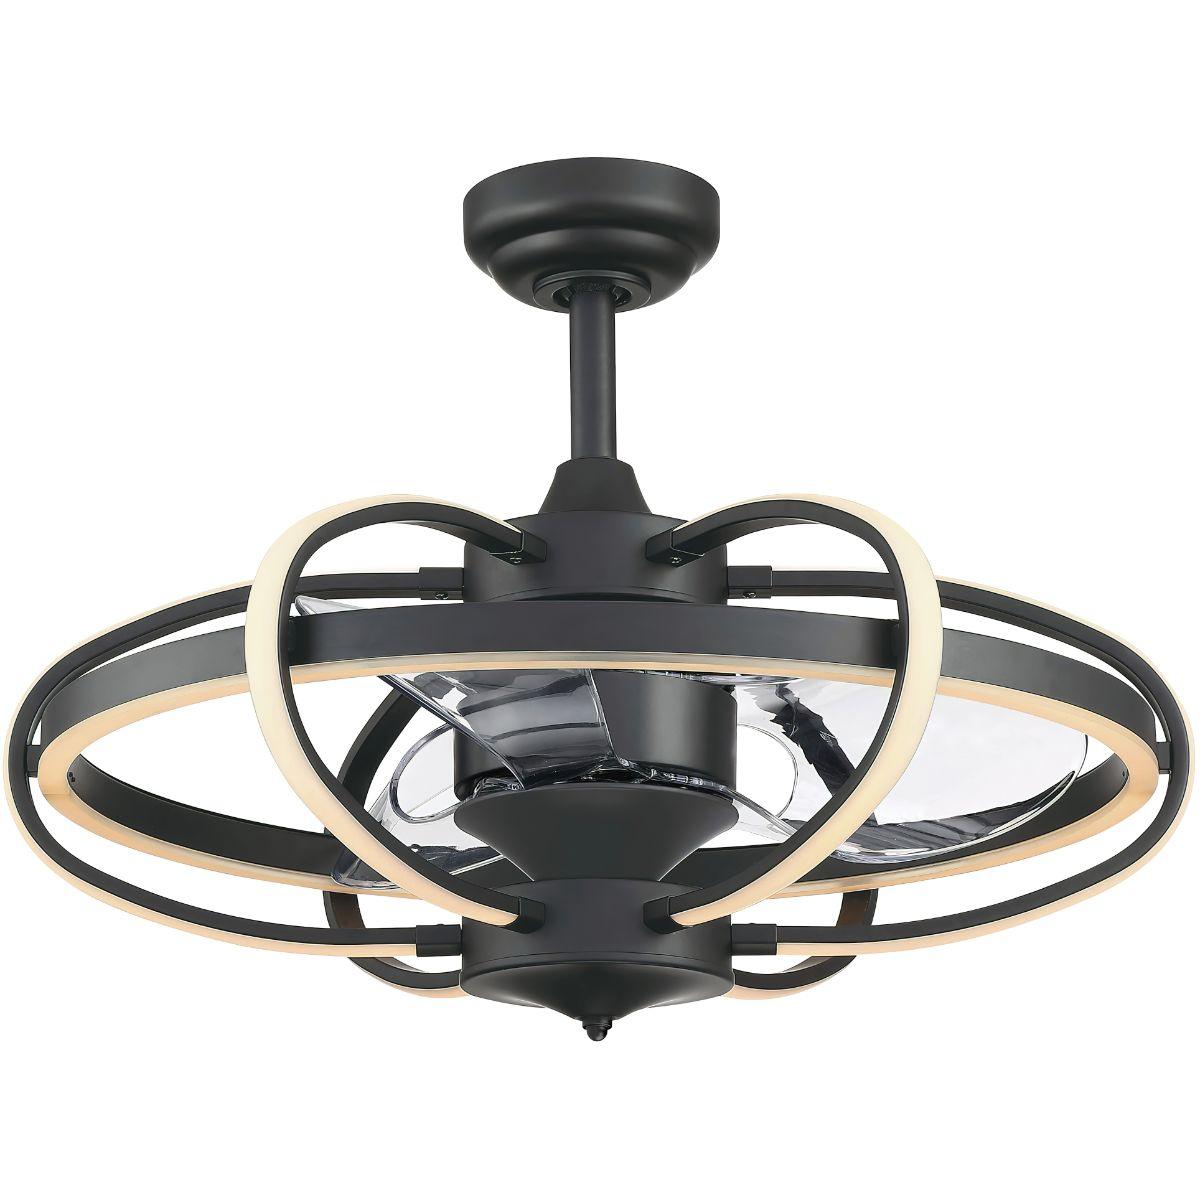 Obvi 22 Inch Modern Chandelier Ceiling Fan With Light And Remote